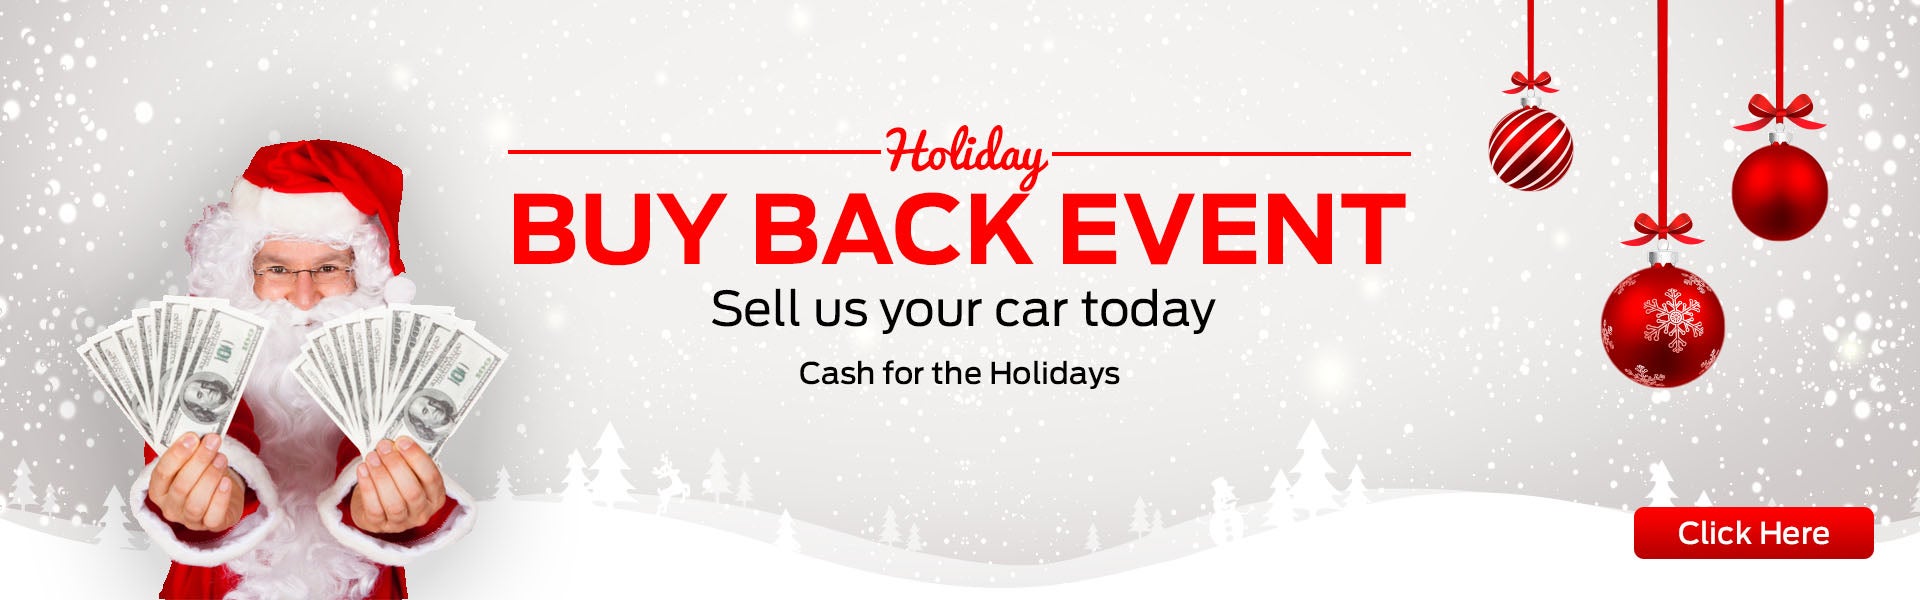 Holiday Buy Back Event